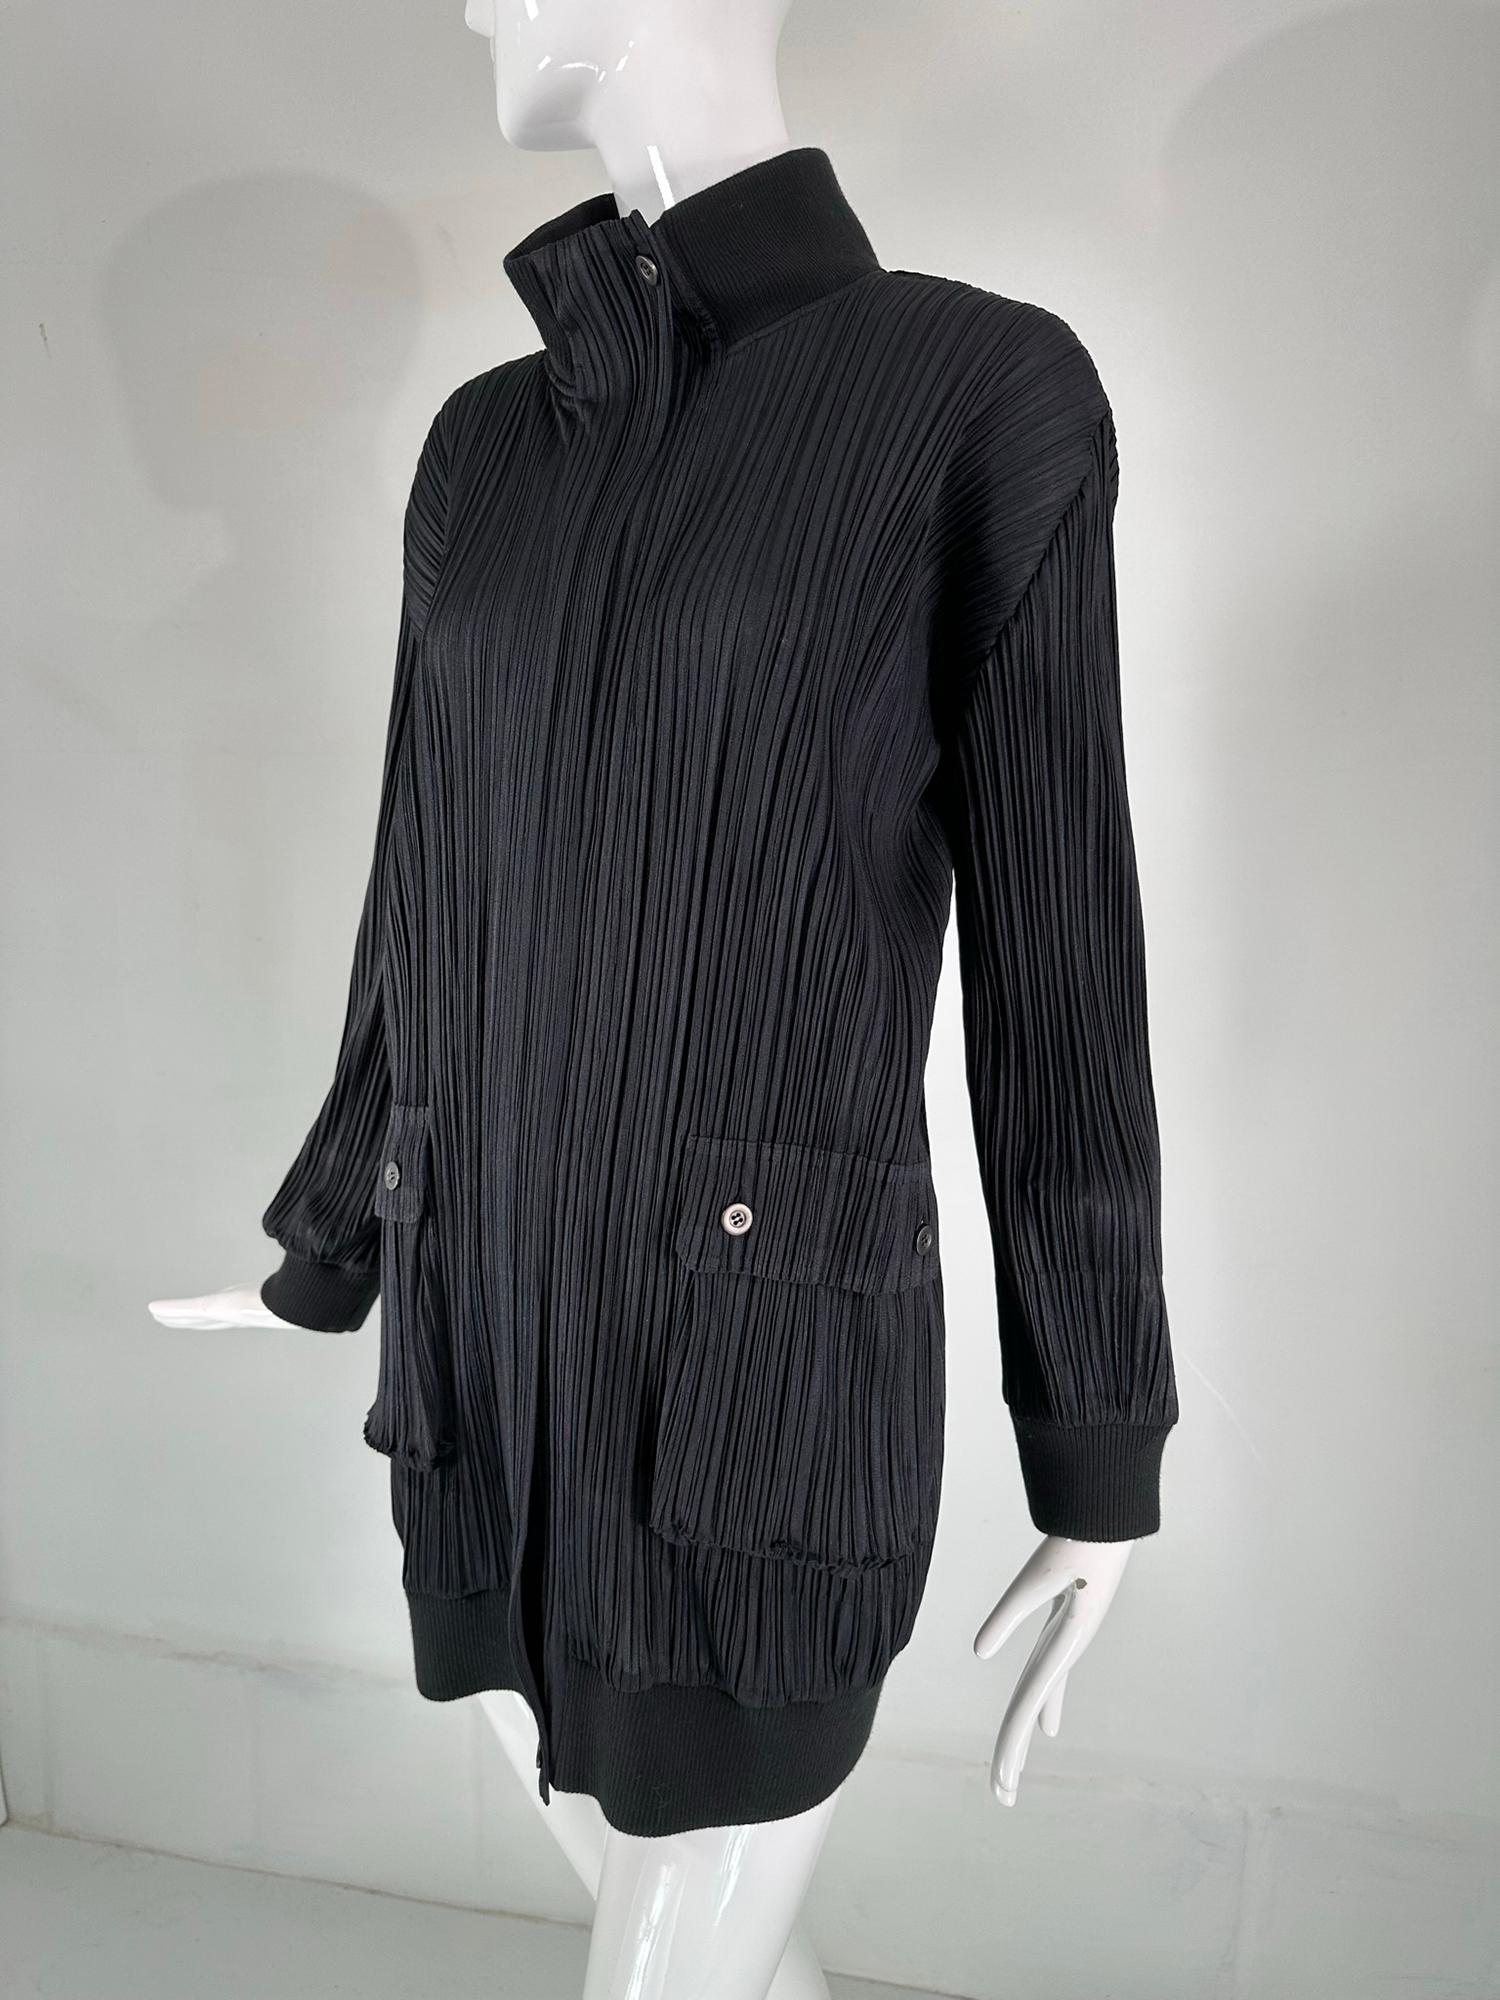 Issey Miyake Pleats Please black funnel neck, hidden zipper front long jacket. Long sleeve jacket has ribbed cuffs, closes at the front with a chunky zipper that is hidden with a side placket, it buttons at the top & bottom. There are hip front,